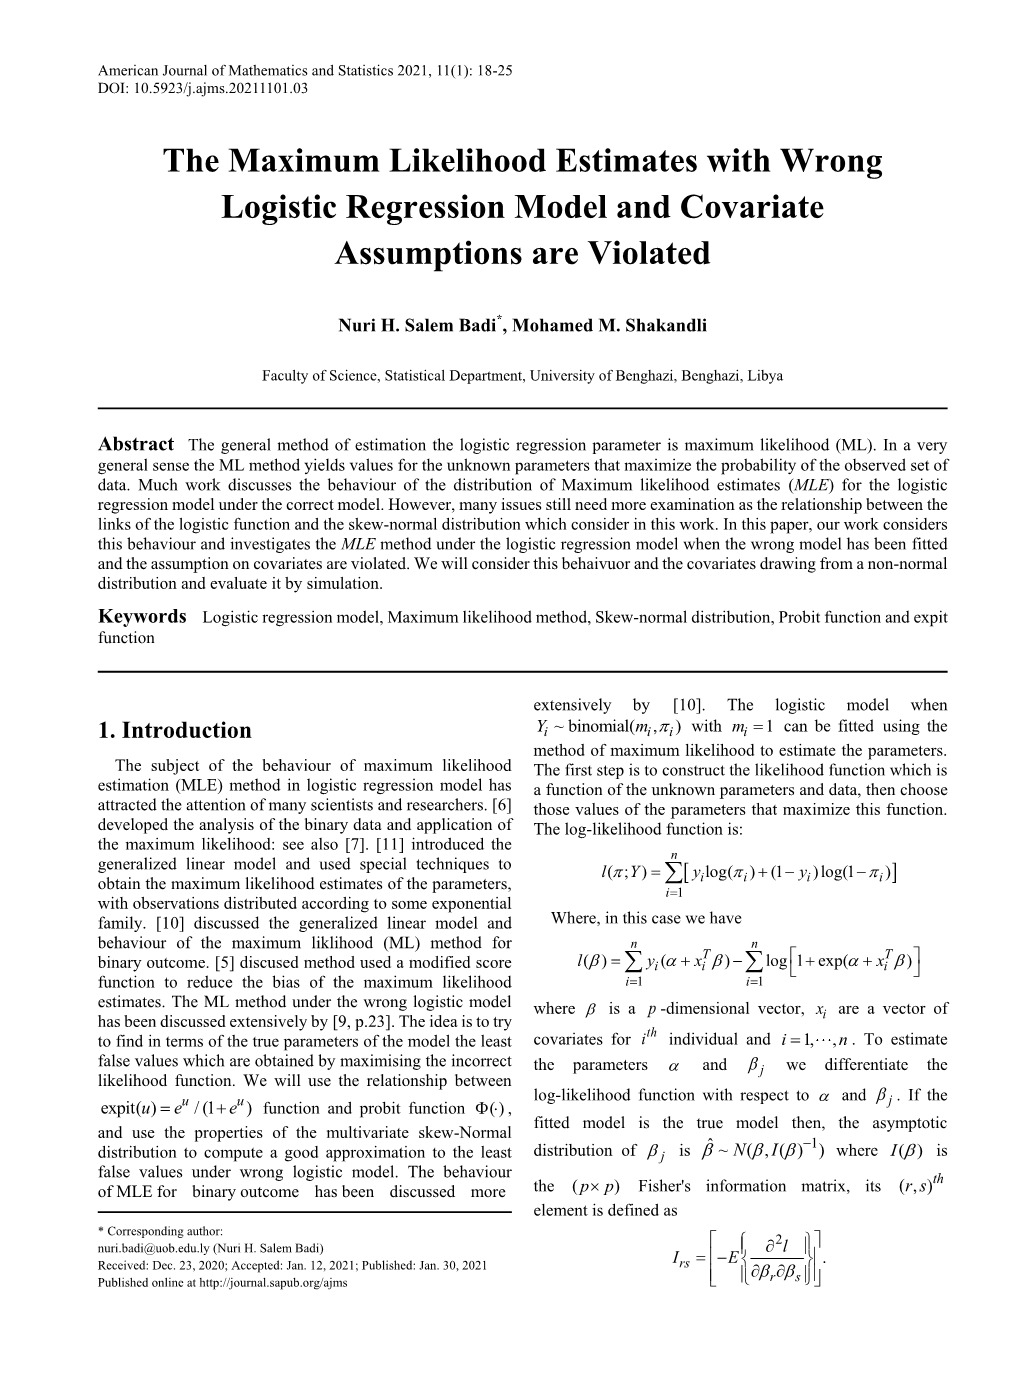 Logistic Regression Model, Maximum Likelihood Method, Skew-Normal Distribution, Probit Function and Expit Function